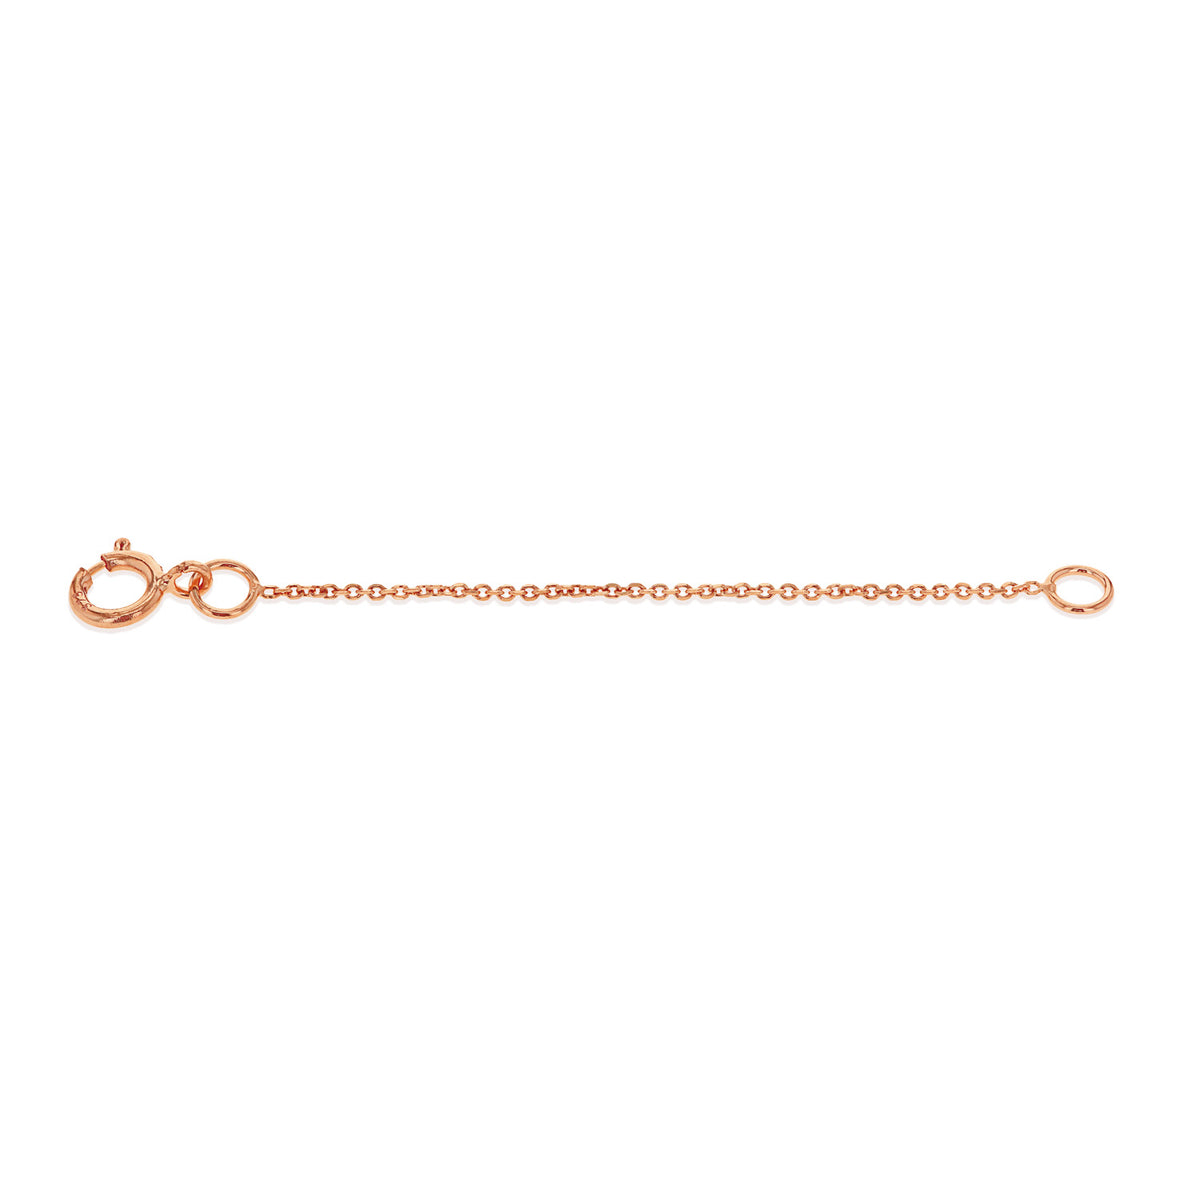 EXTENSION CHAIN | 9K SOLID ROSE GOLD